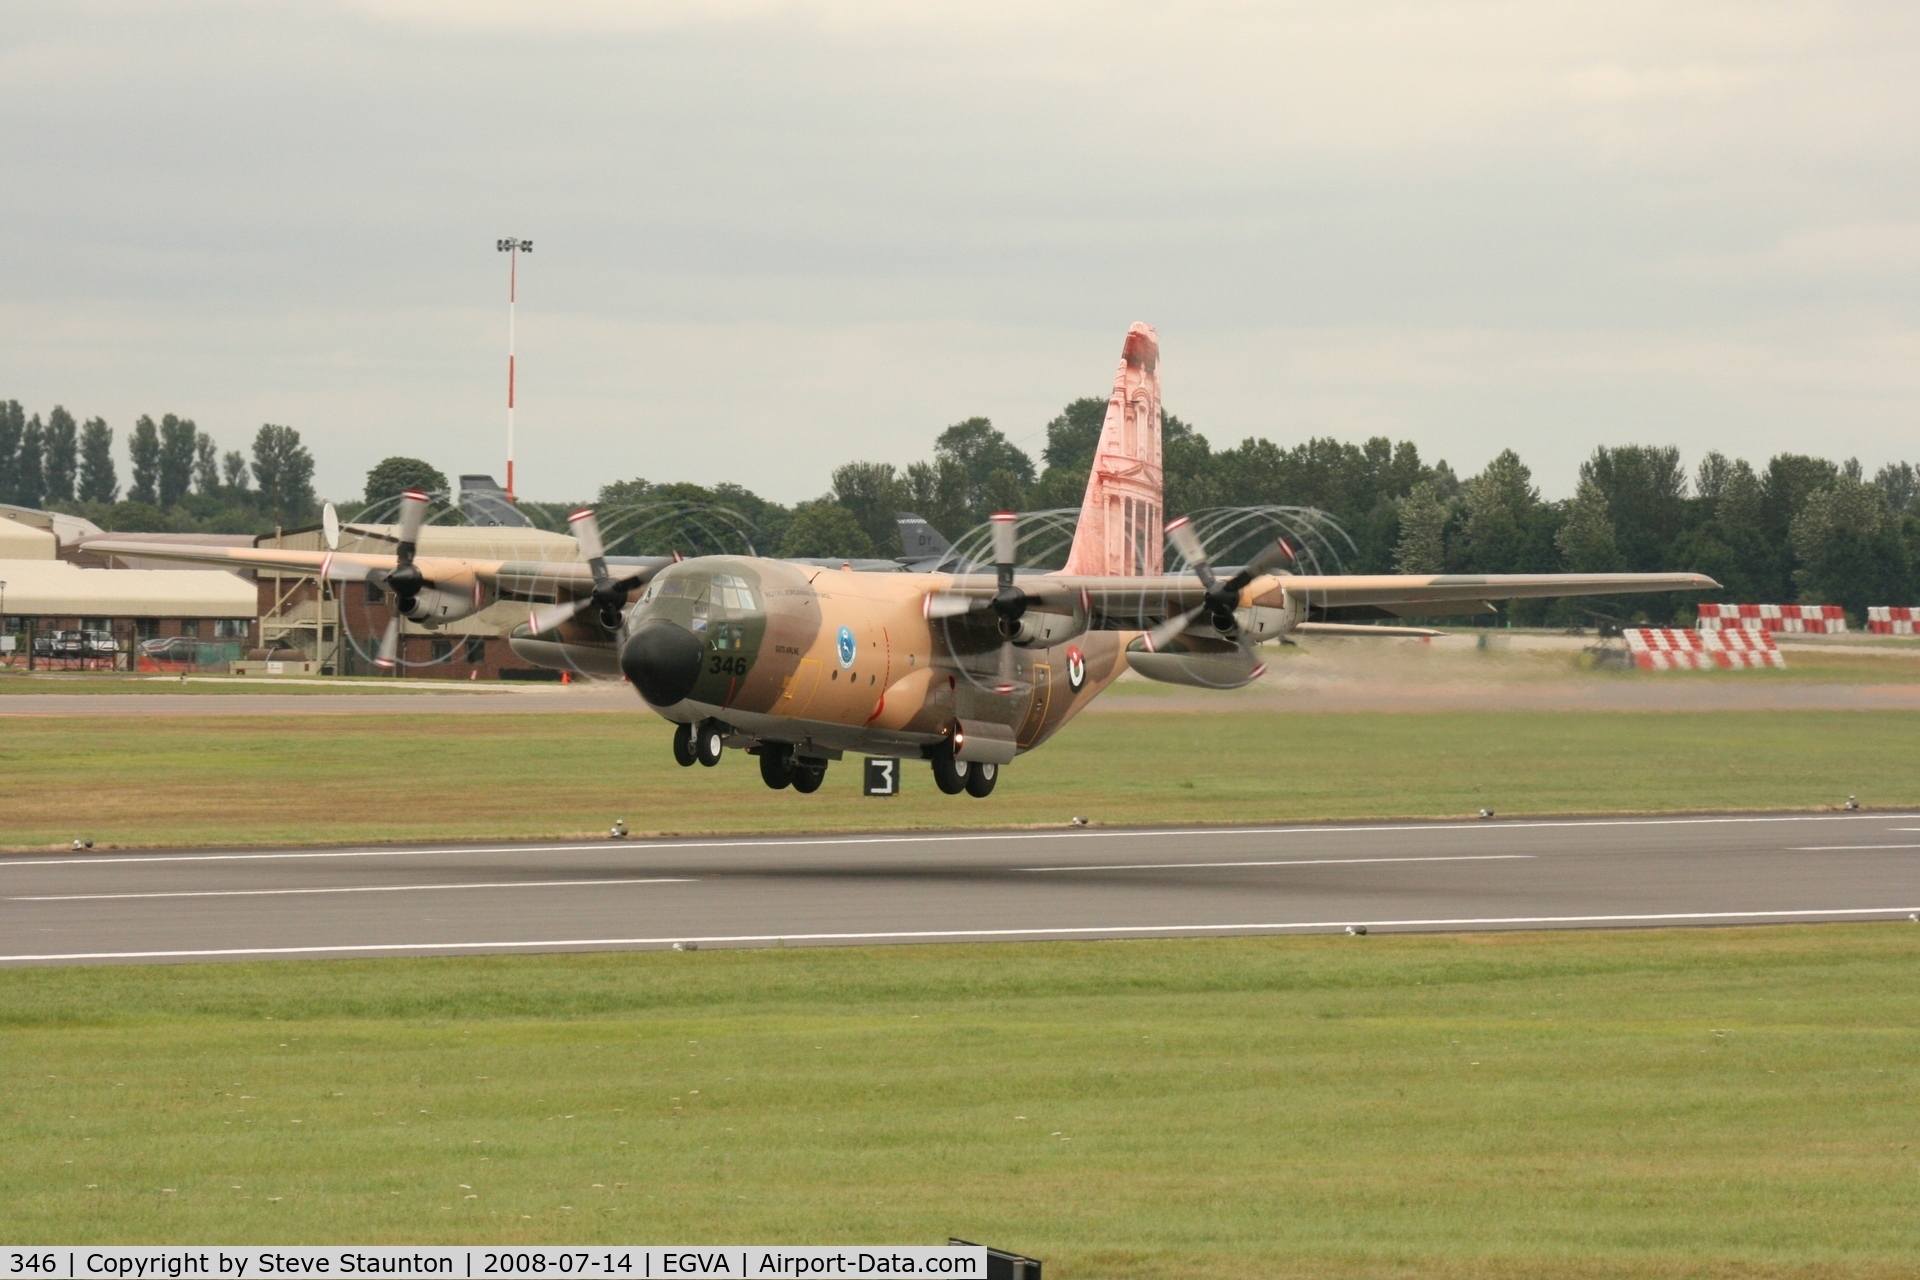 346, Lockheed C-130H Hercules C/N 382-4920, Taken at the Royal International Air Tattoo 2008 during arrivals and departures (show days cancelled due to bad weather)